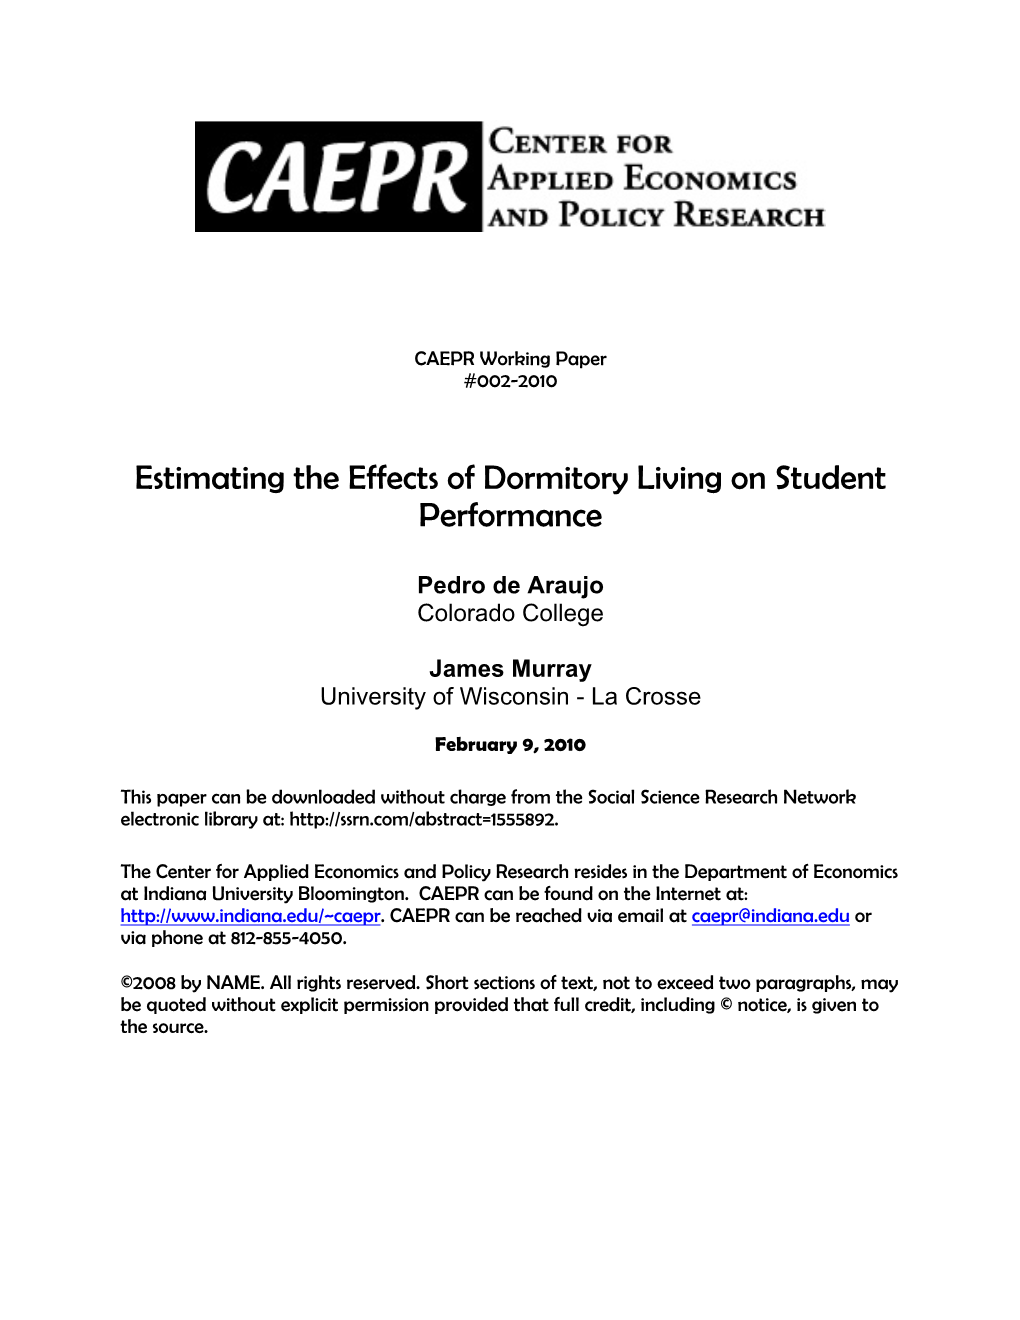 Estimating the Effects of Dormitory Living on Student Performance